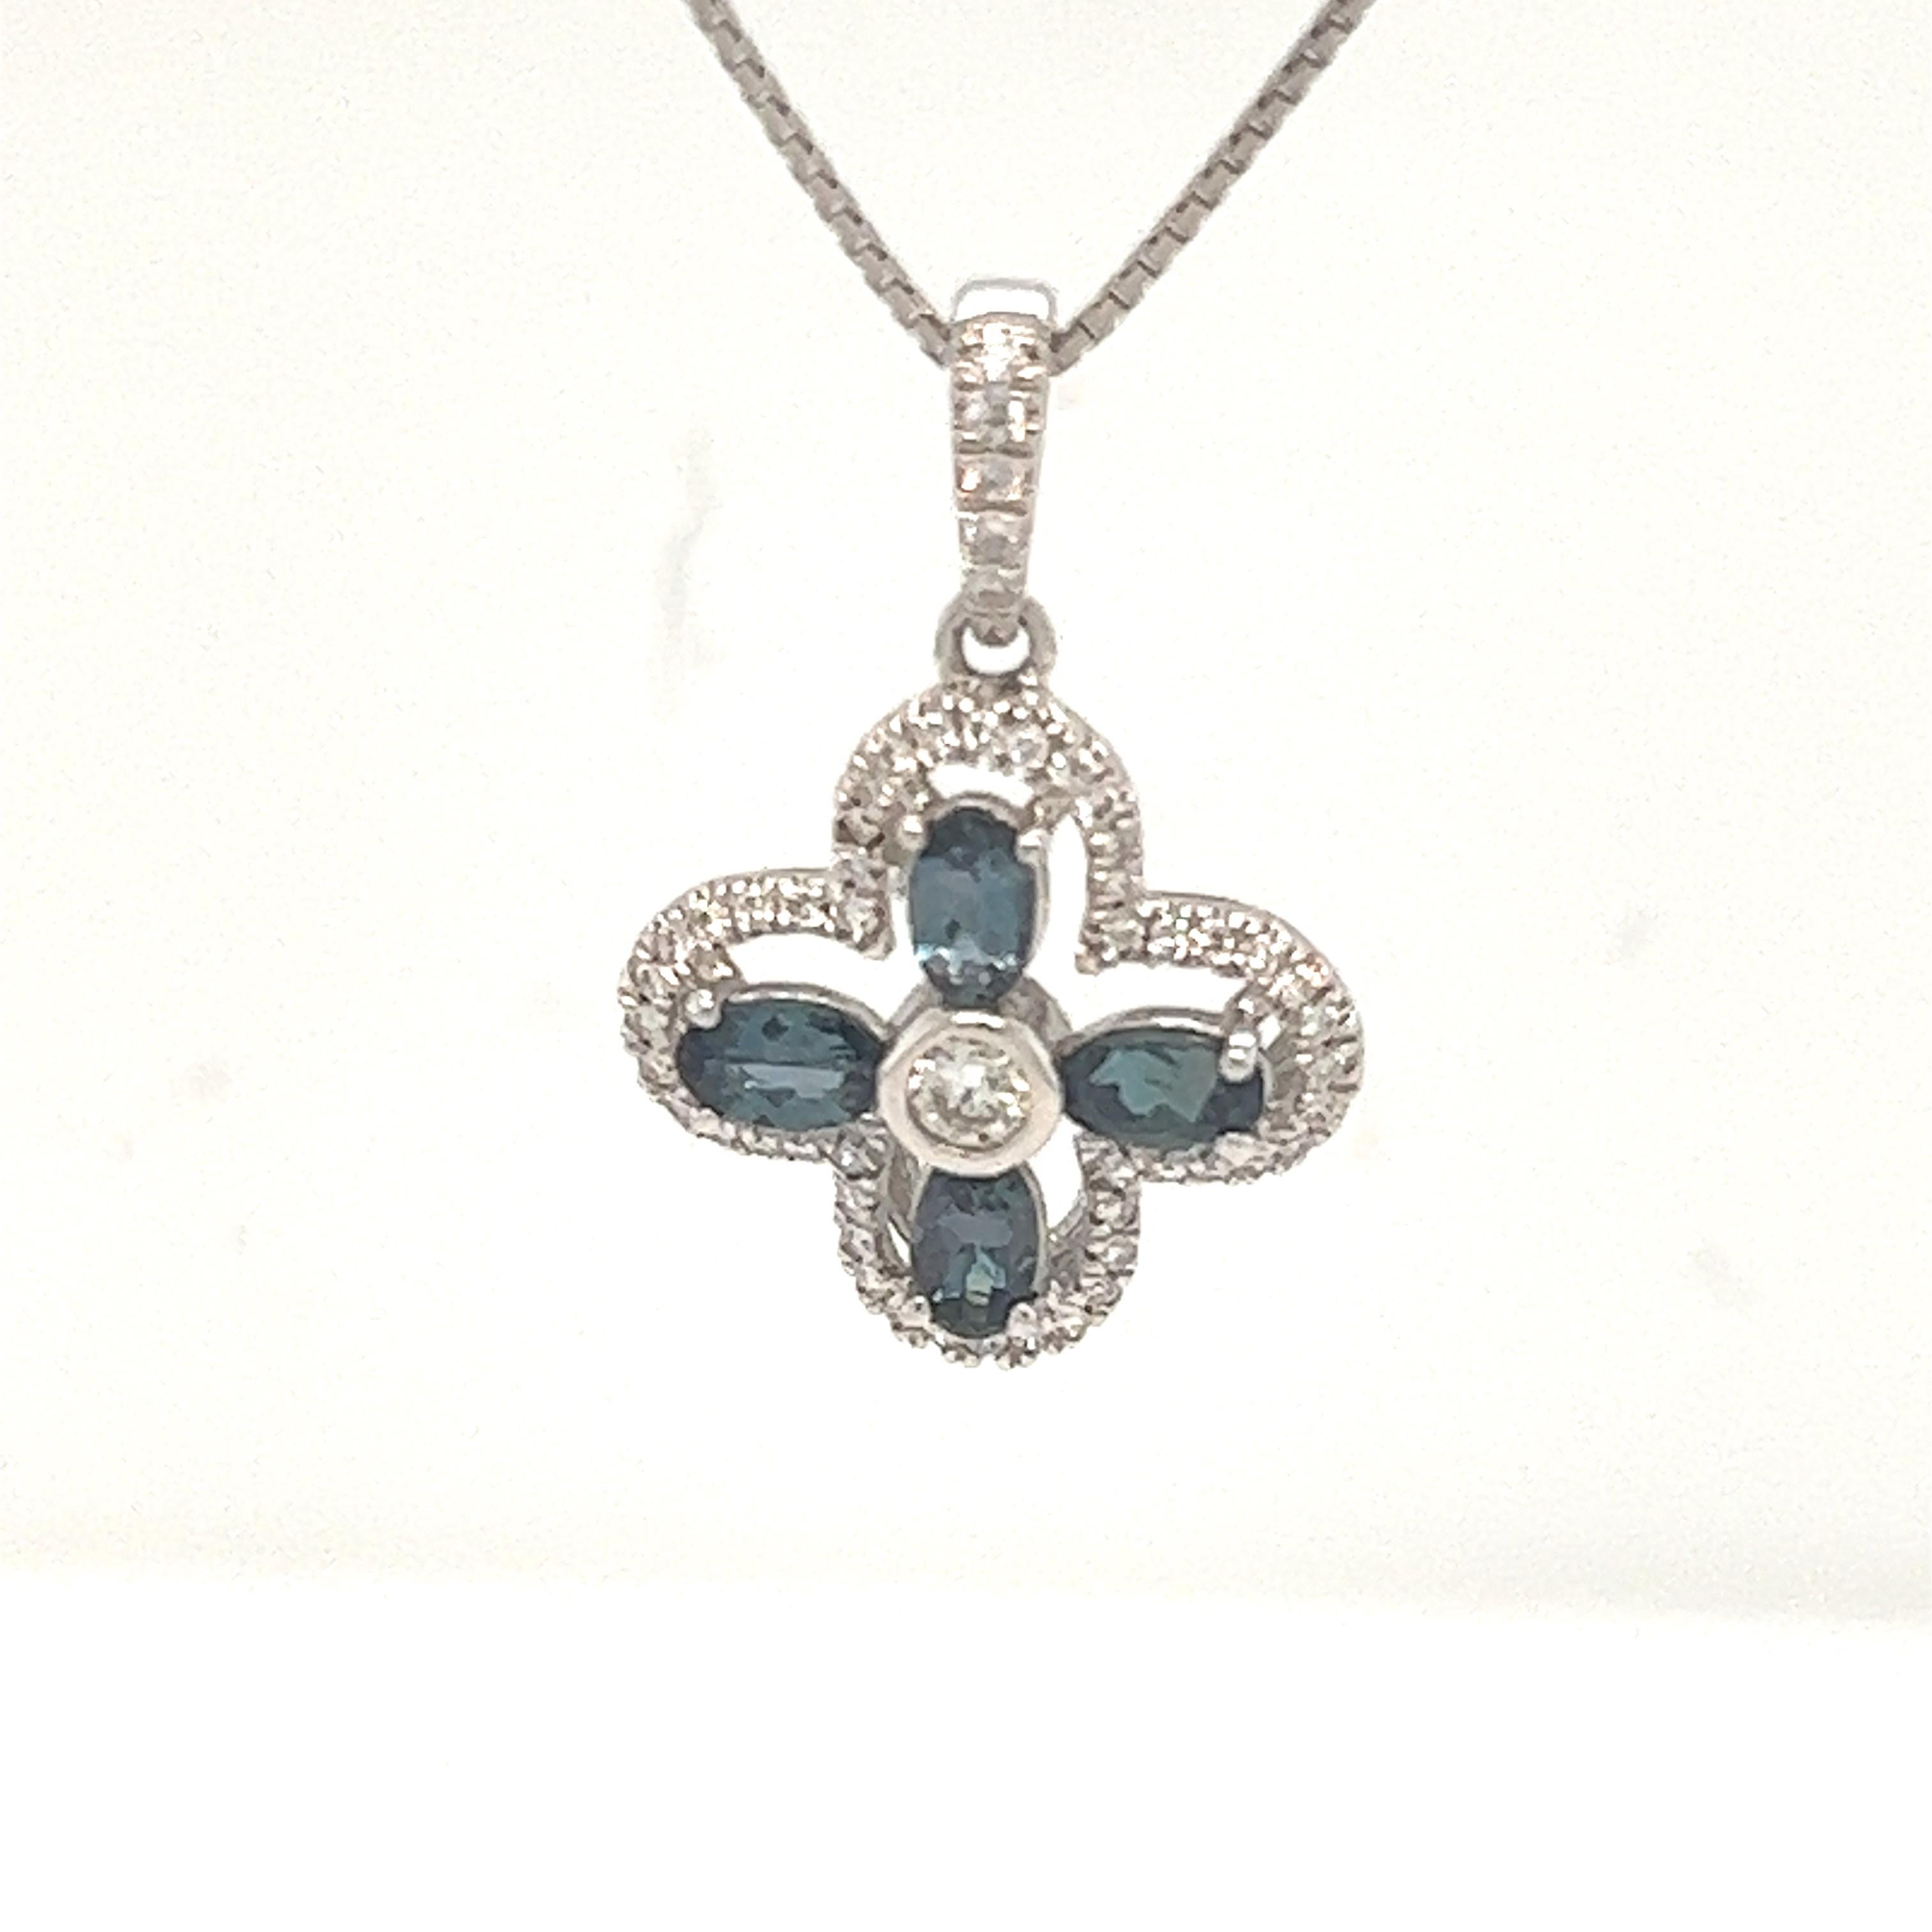 This is an exceptional natural oval-shaped alexandrite and diamond pendant set in solid 14K white gold. The fancy 5x3MM Alexandrite has an excellent green color and is surrounded by a halo of round-cut white diamonds. The pendant is stamped 14K and